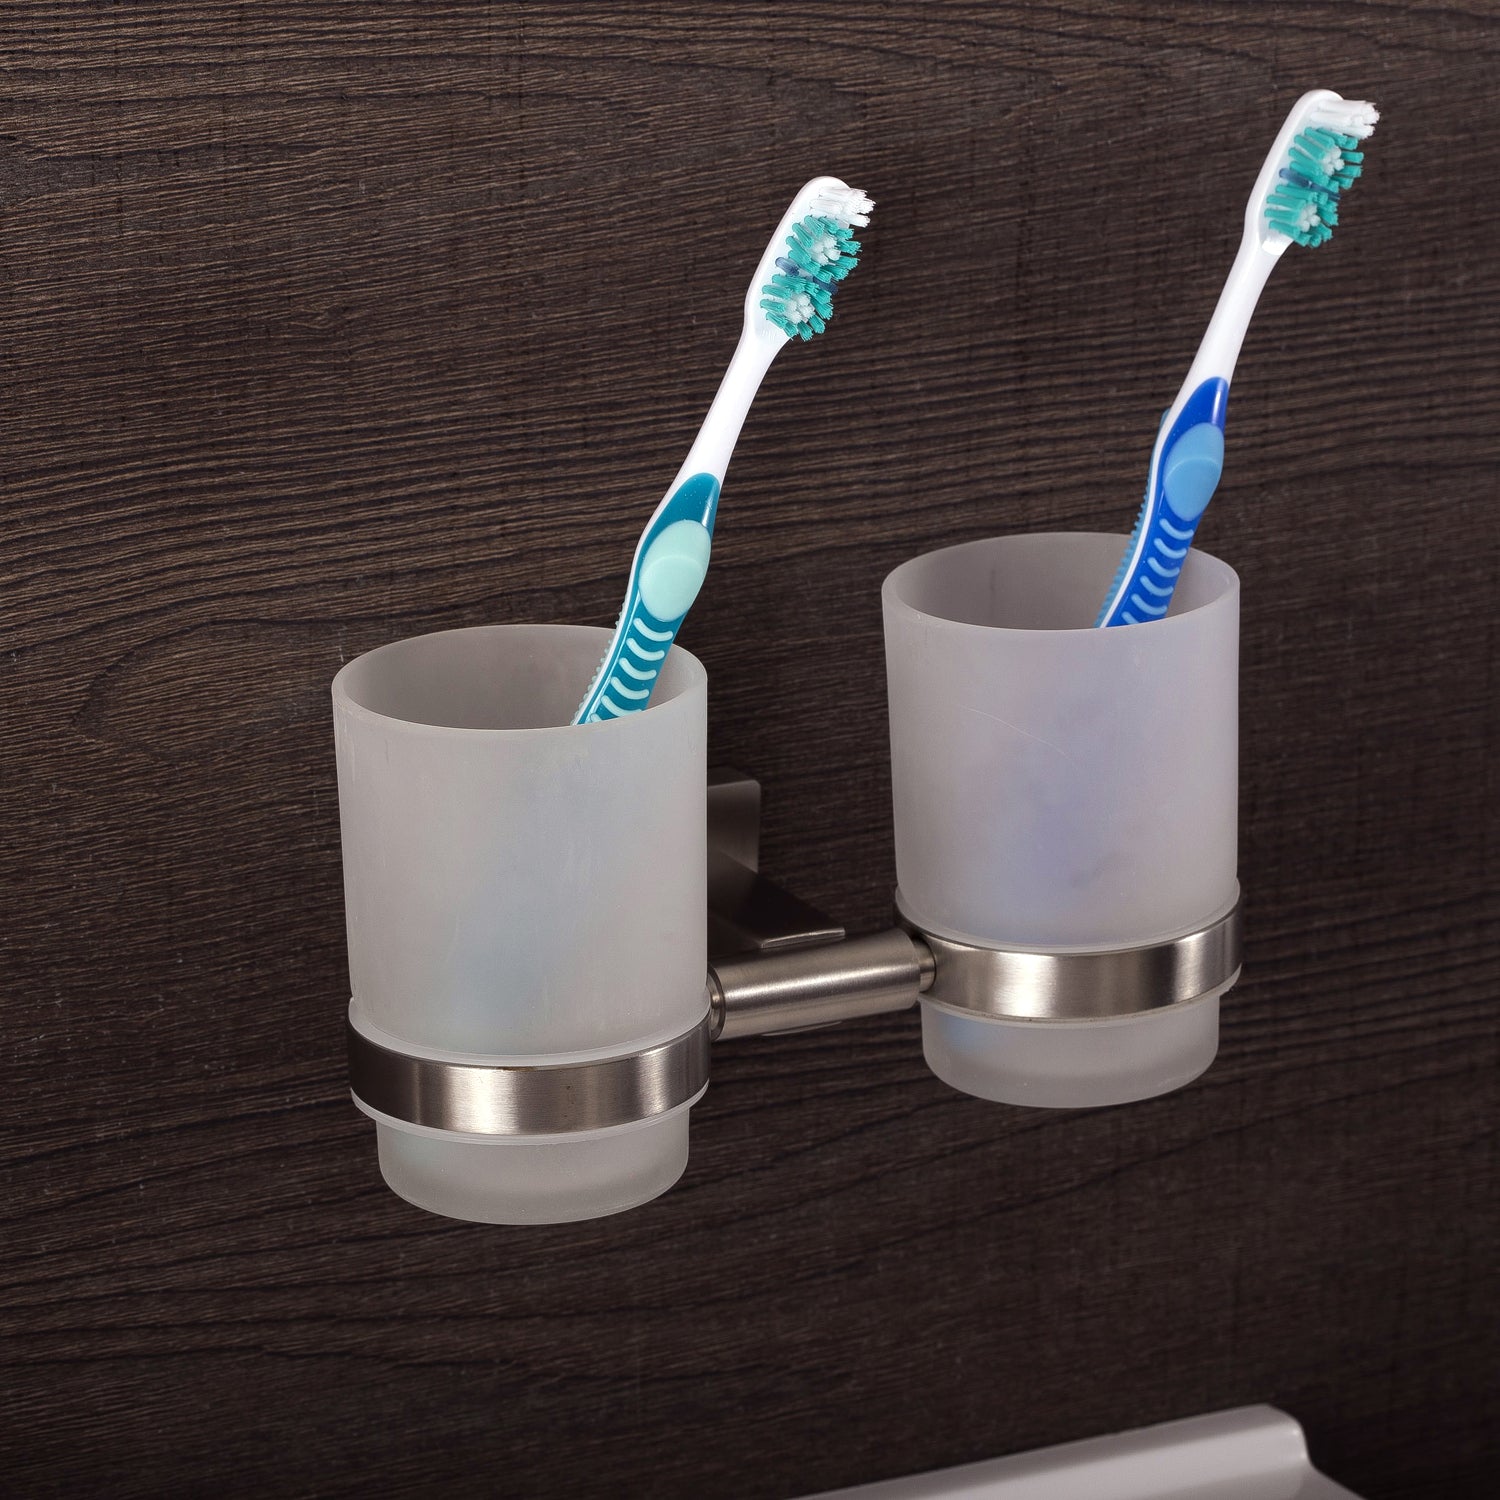 DAX Bathroom Double Tumbler Toothbrush Holder, Wall Mount Stainless Steel with Glass Cup, Polish Finish, 7-1/16 x 3-3/4 x 3-3/4 Inches (DAX-G0114-P)